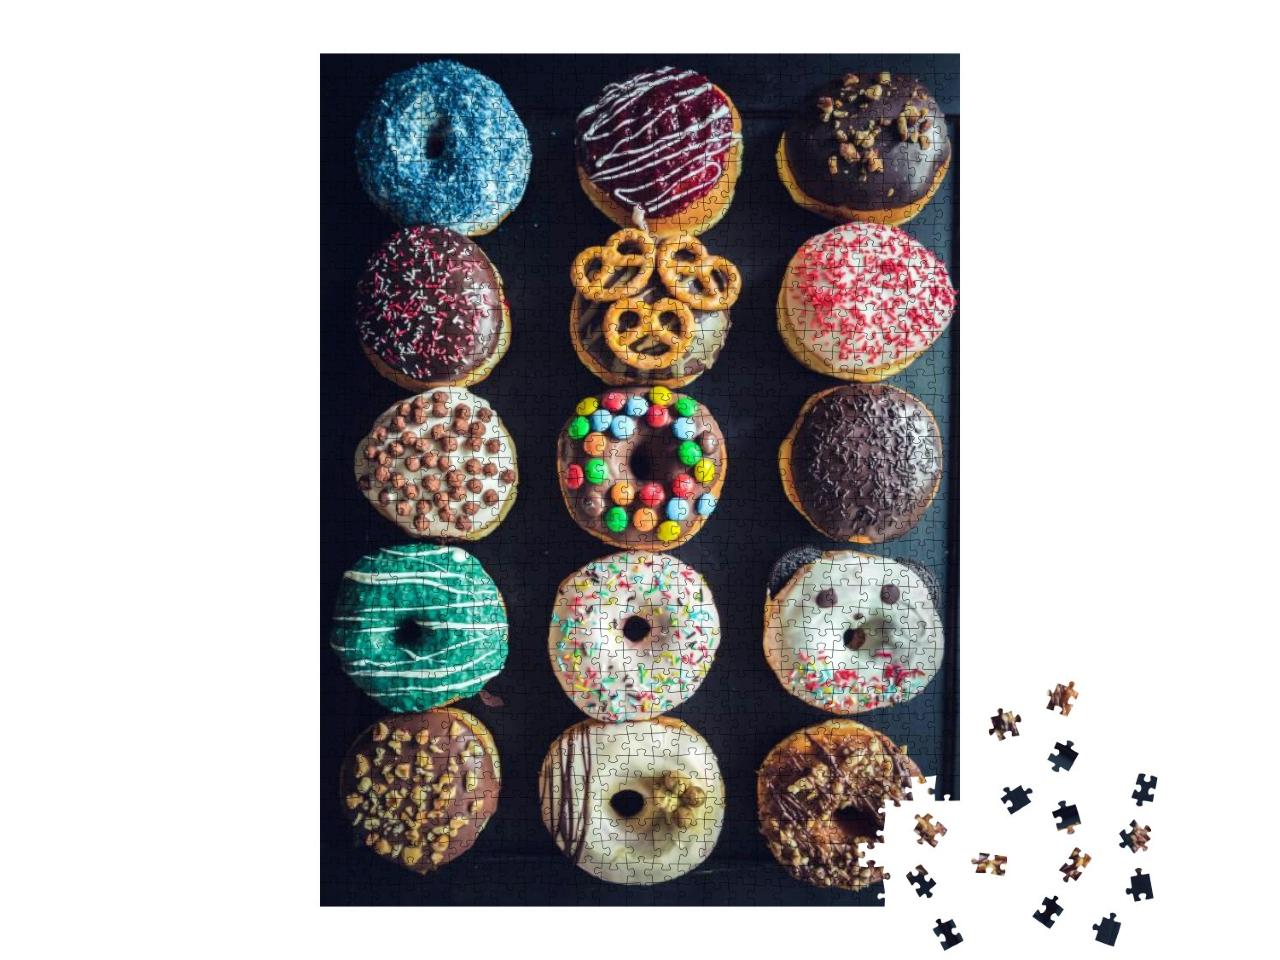 Sweet Glazed Donuts Served on the Table... Jigsaw Puzzle with 1000 pieces